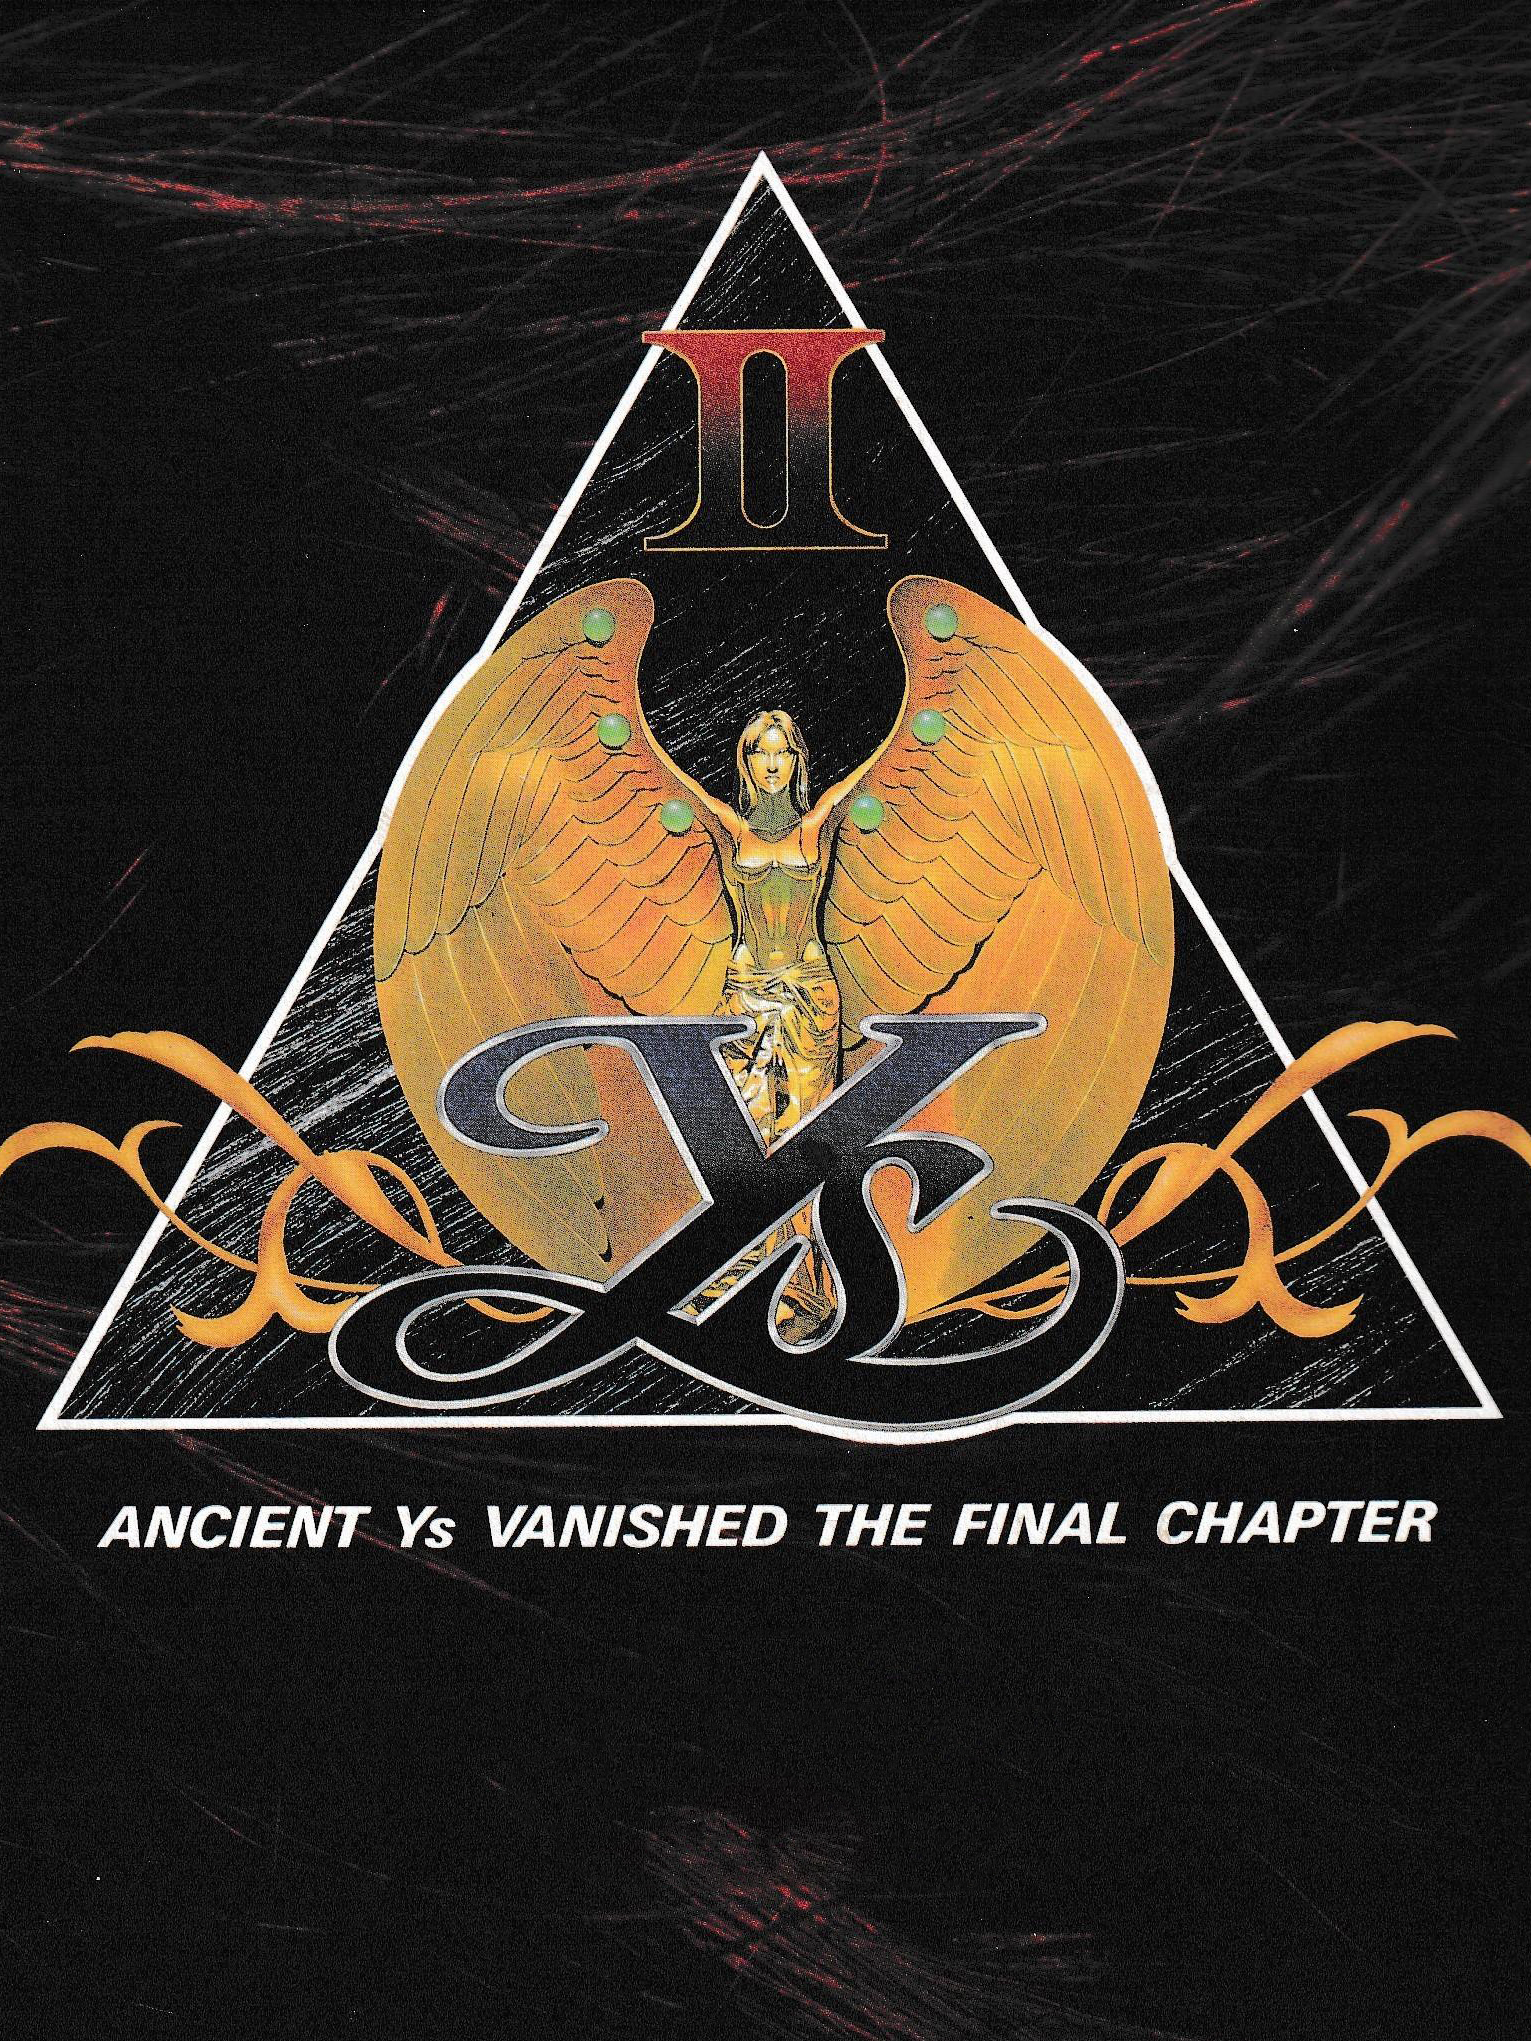 Ys II: Ancient Ys Vanished - The Final Chapter (1988)